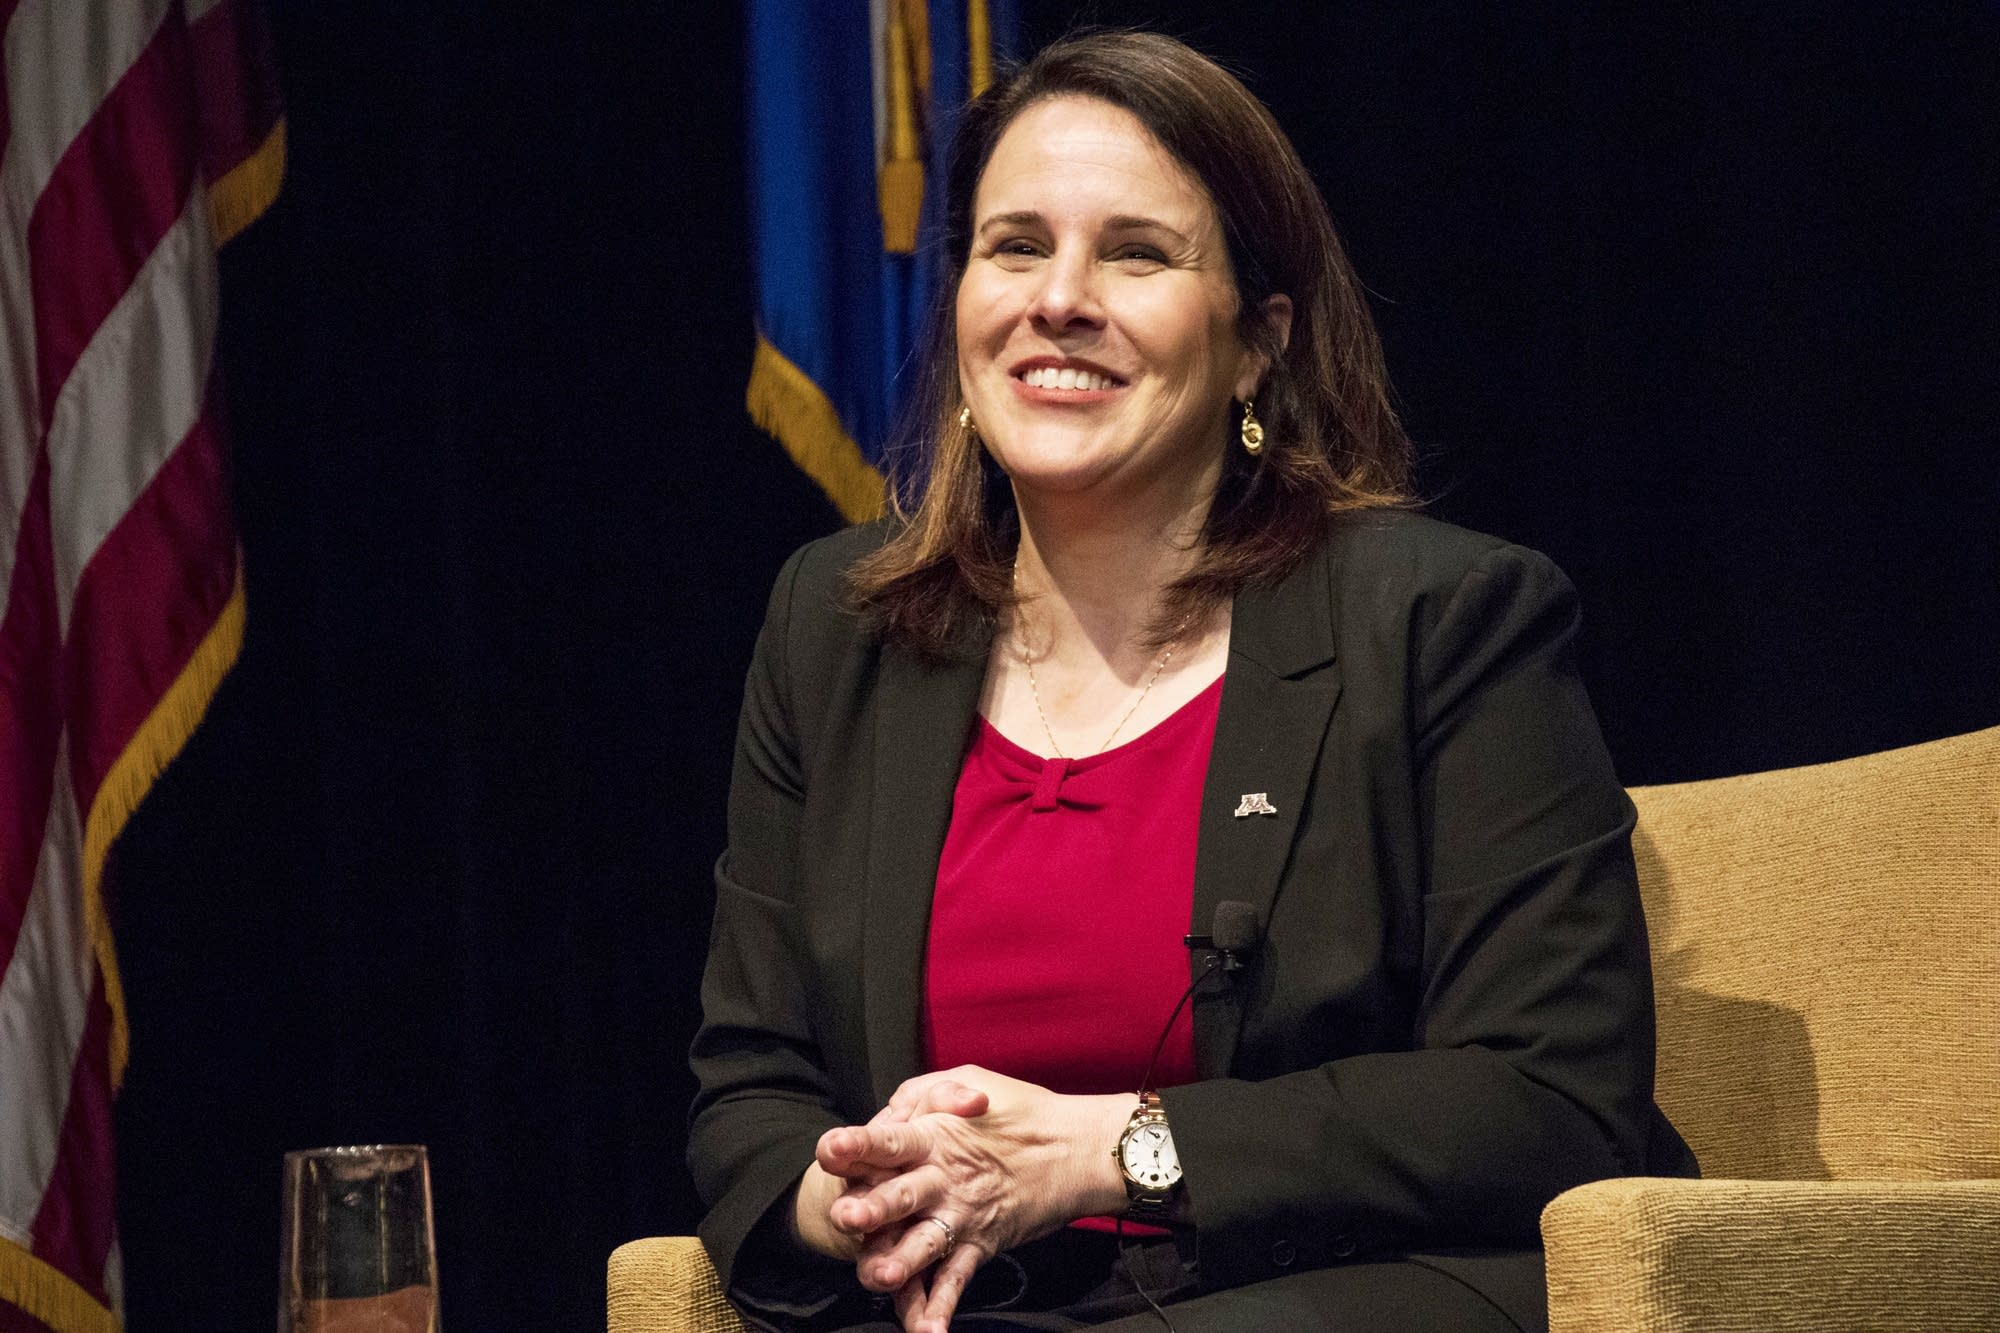 Get Ready for a New University of Minnesota President